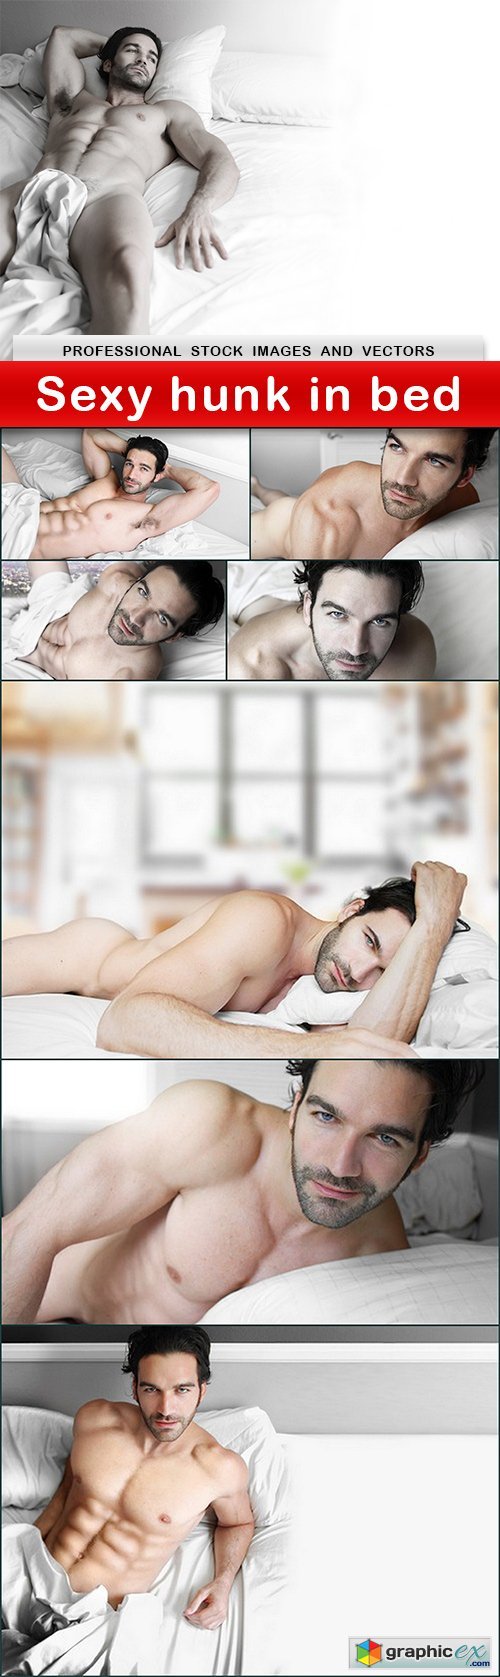 Sexy hunk in bed - 8 UHQ JPEG